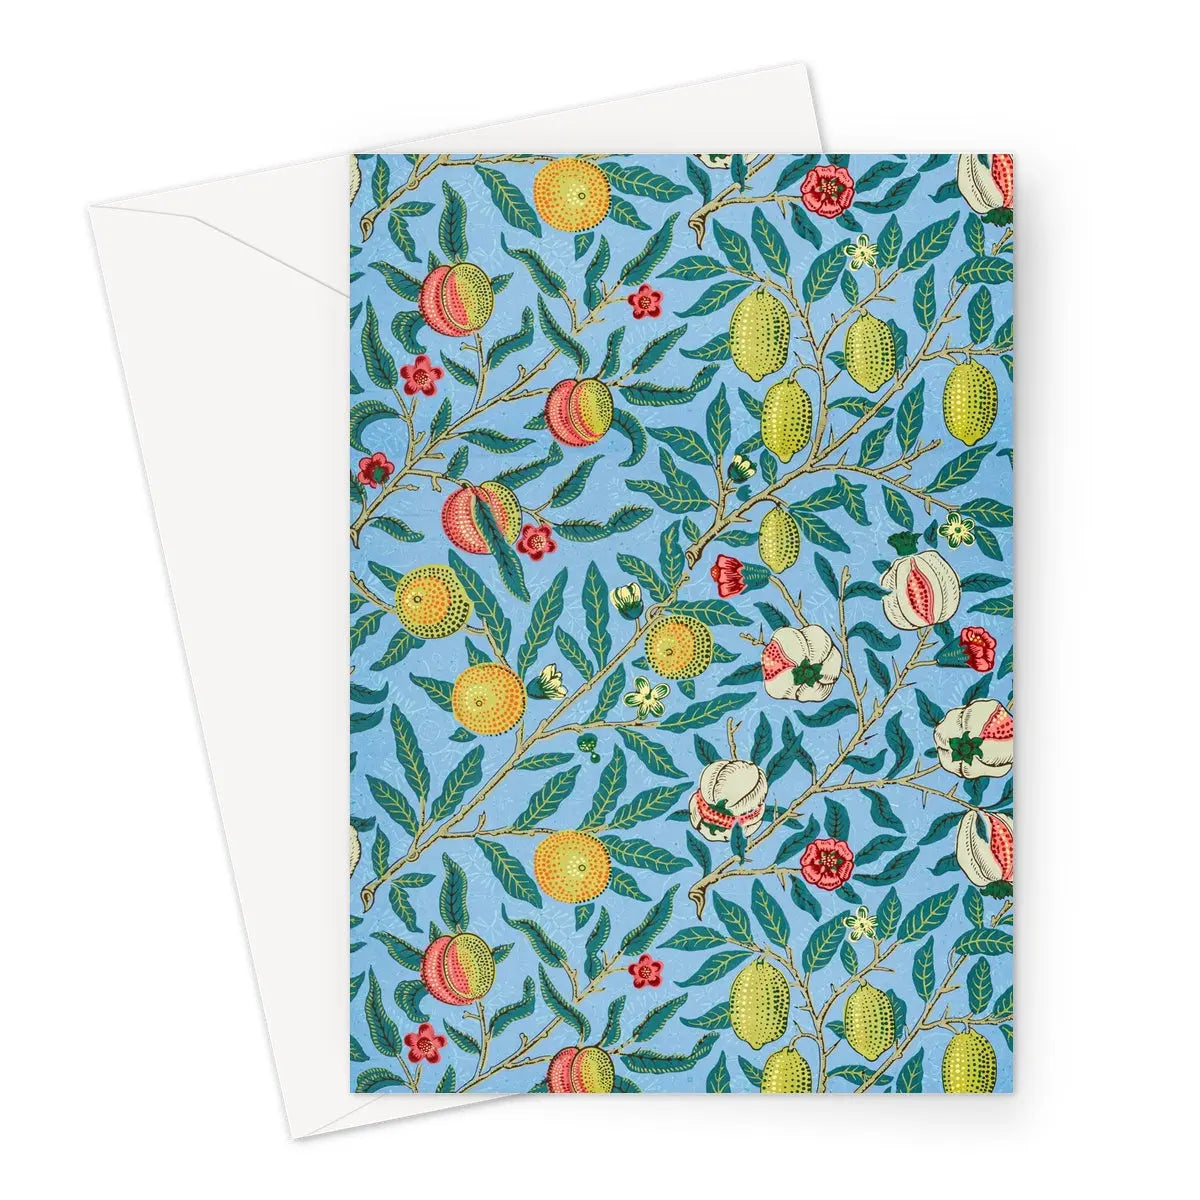 Four Fruits By William Morris Greeting Card - A5 Portrait / 10 Cards - Greeting & Note Cards - Aesthetic Art